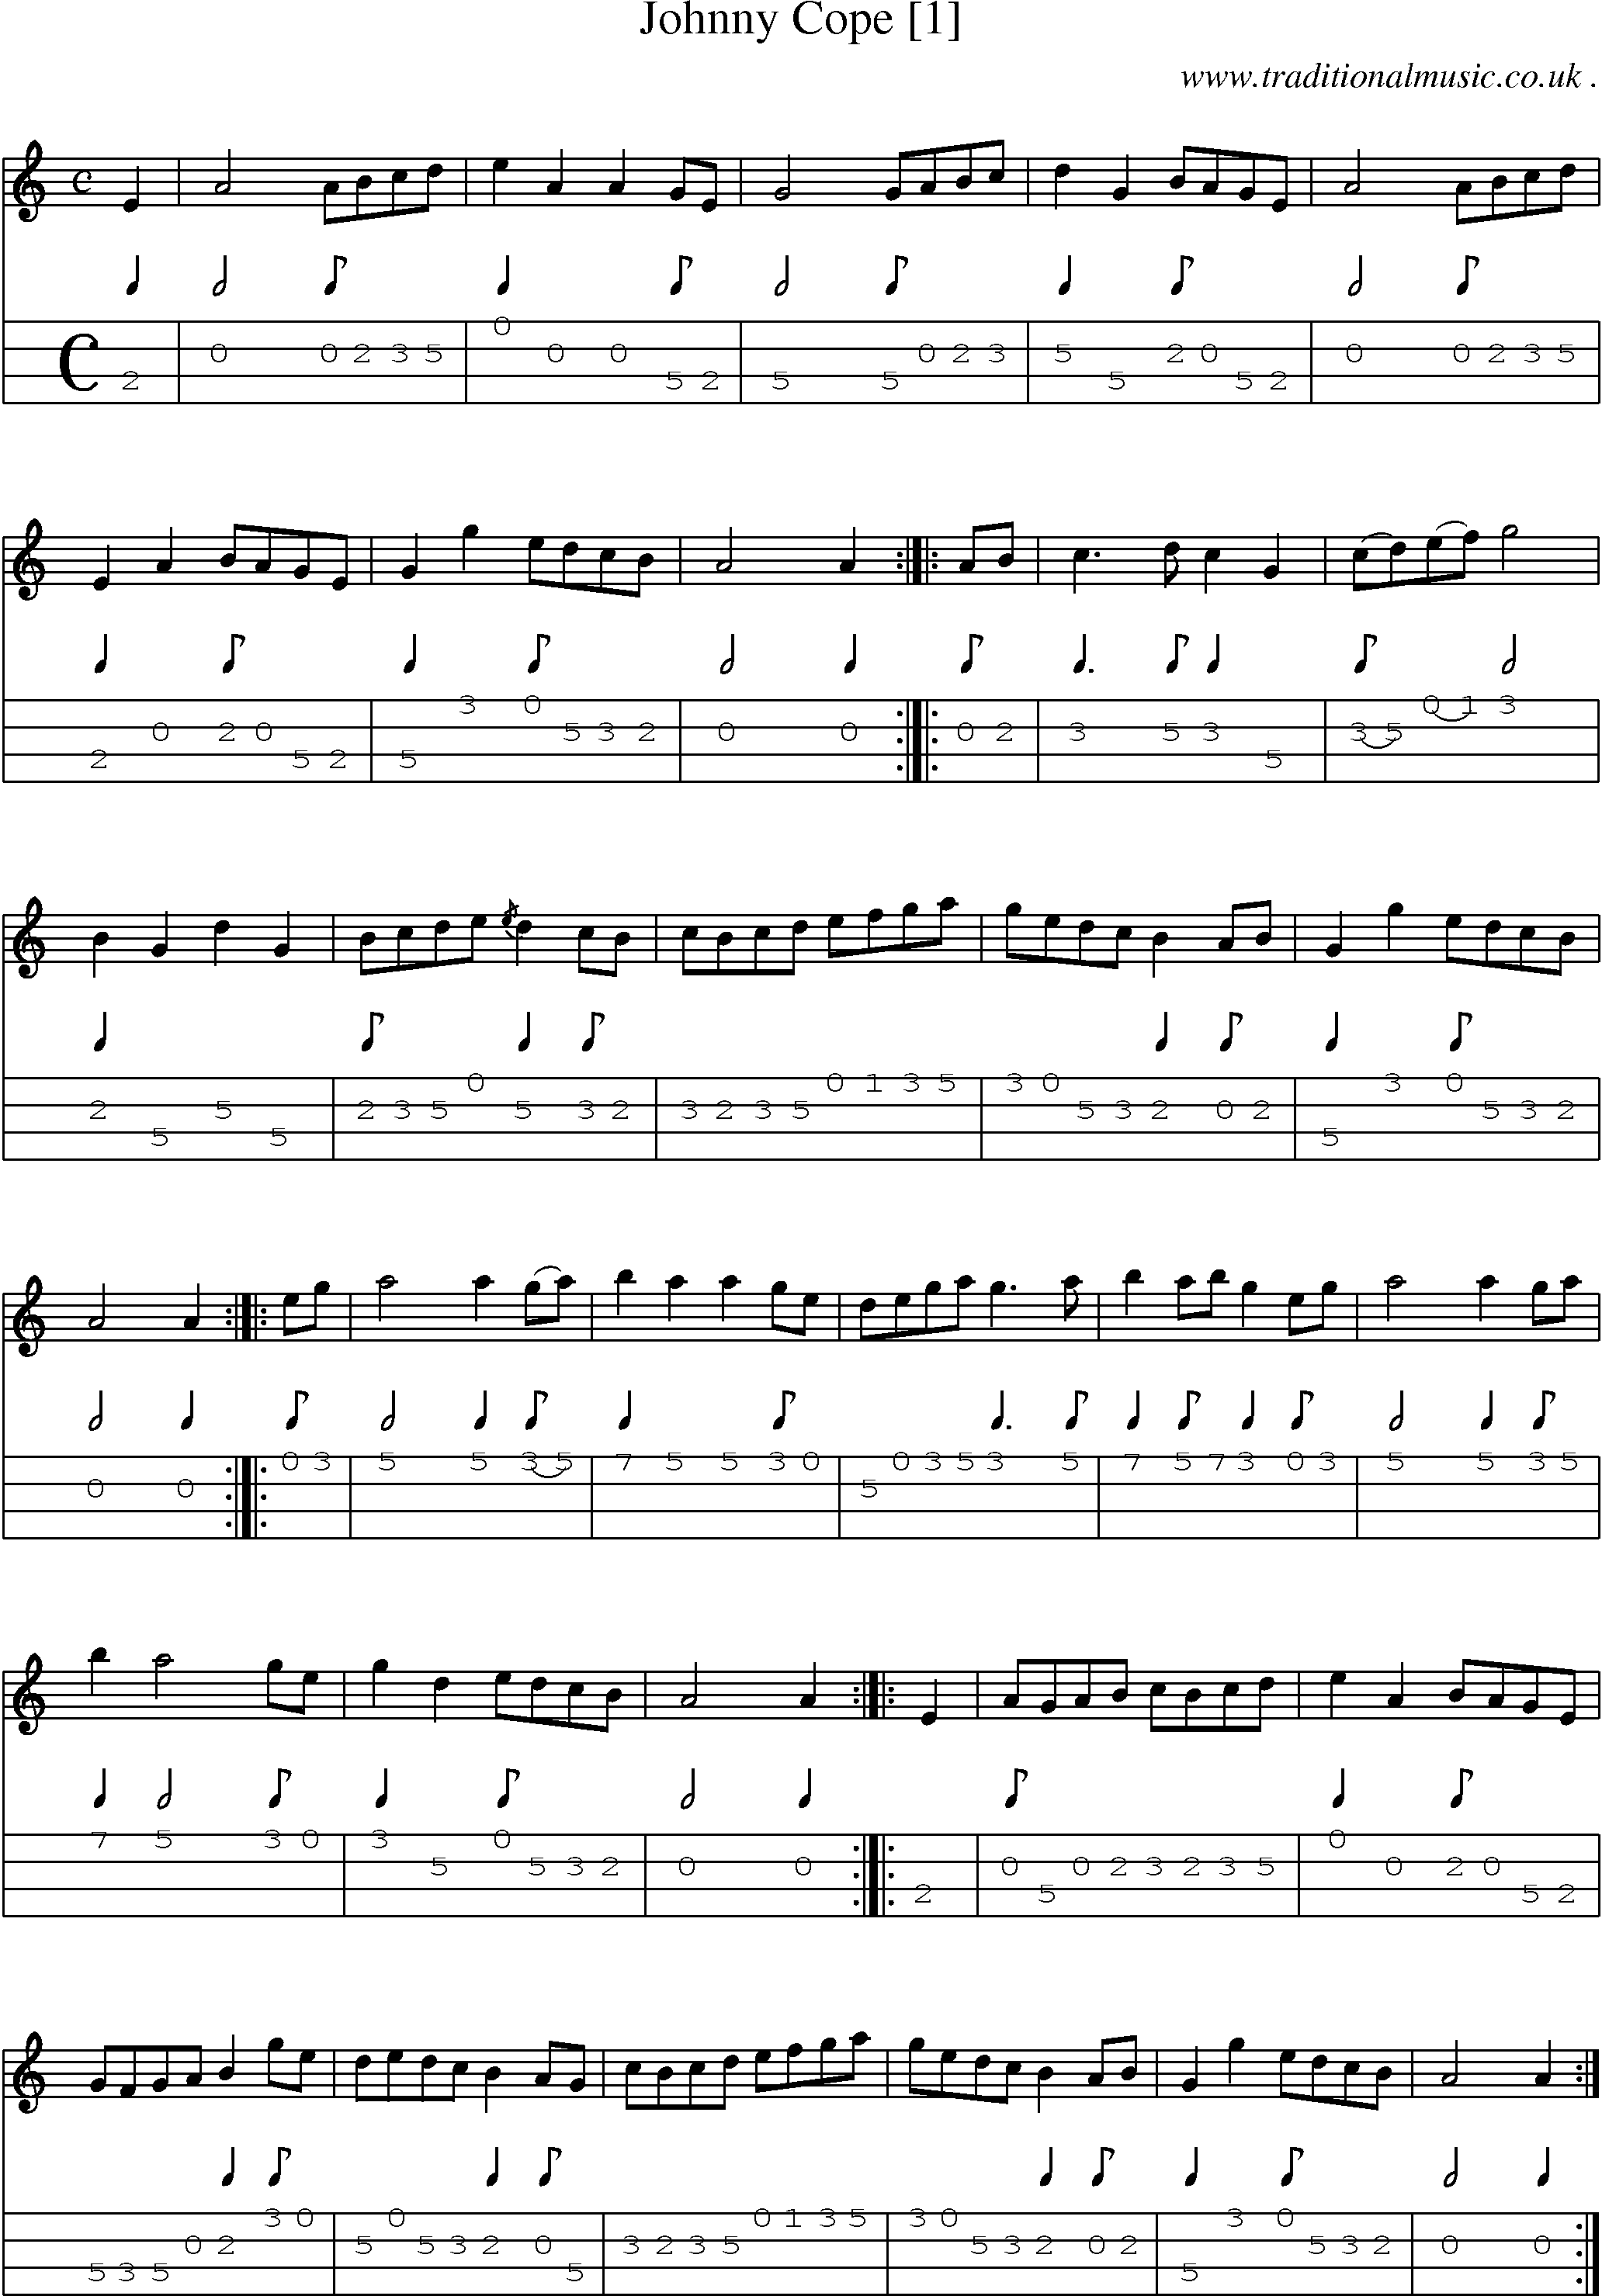 Sheet-music  score, Chords and Mandolin Tabs for Johnny Cope [1]